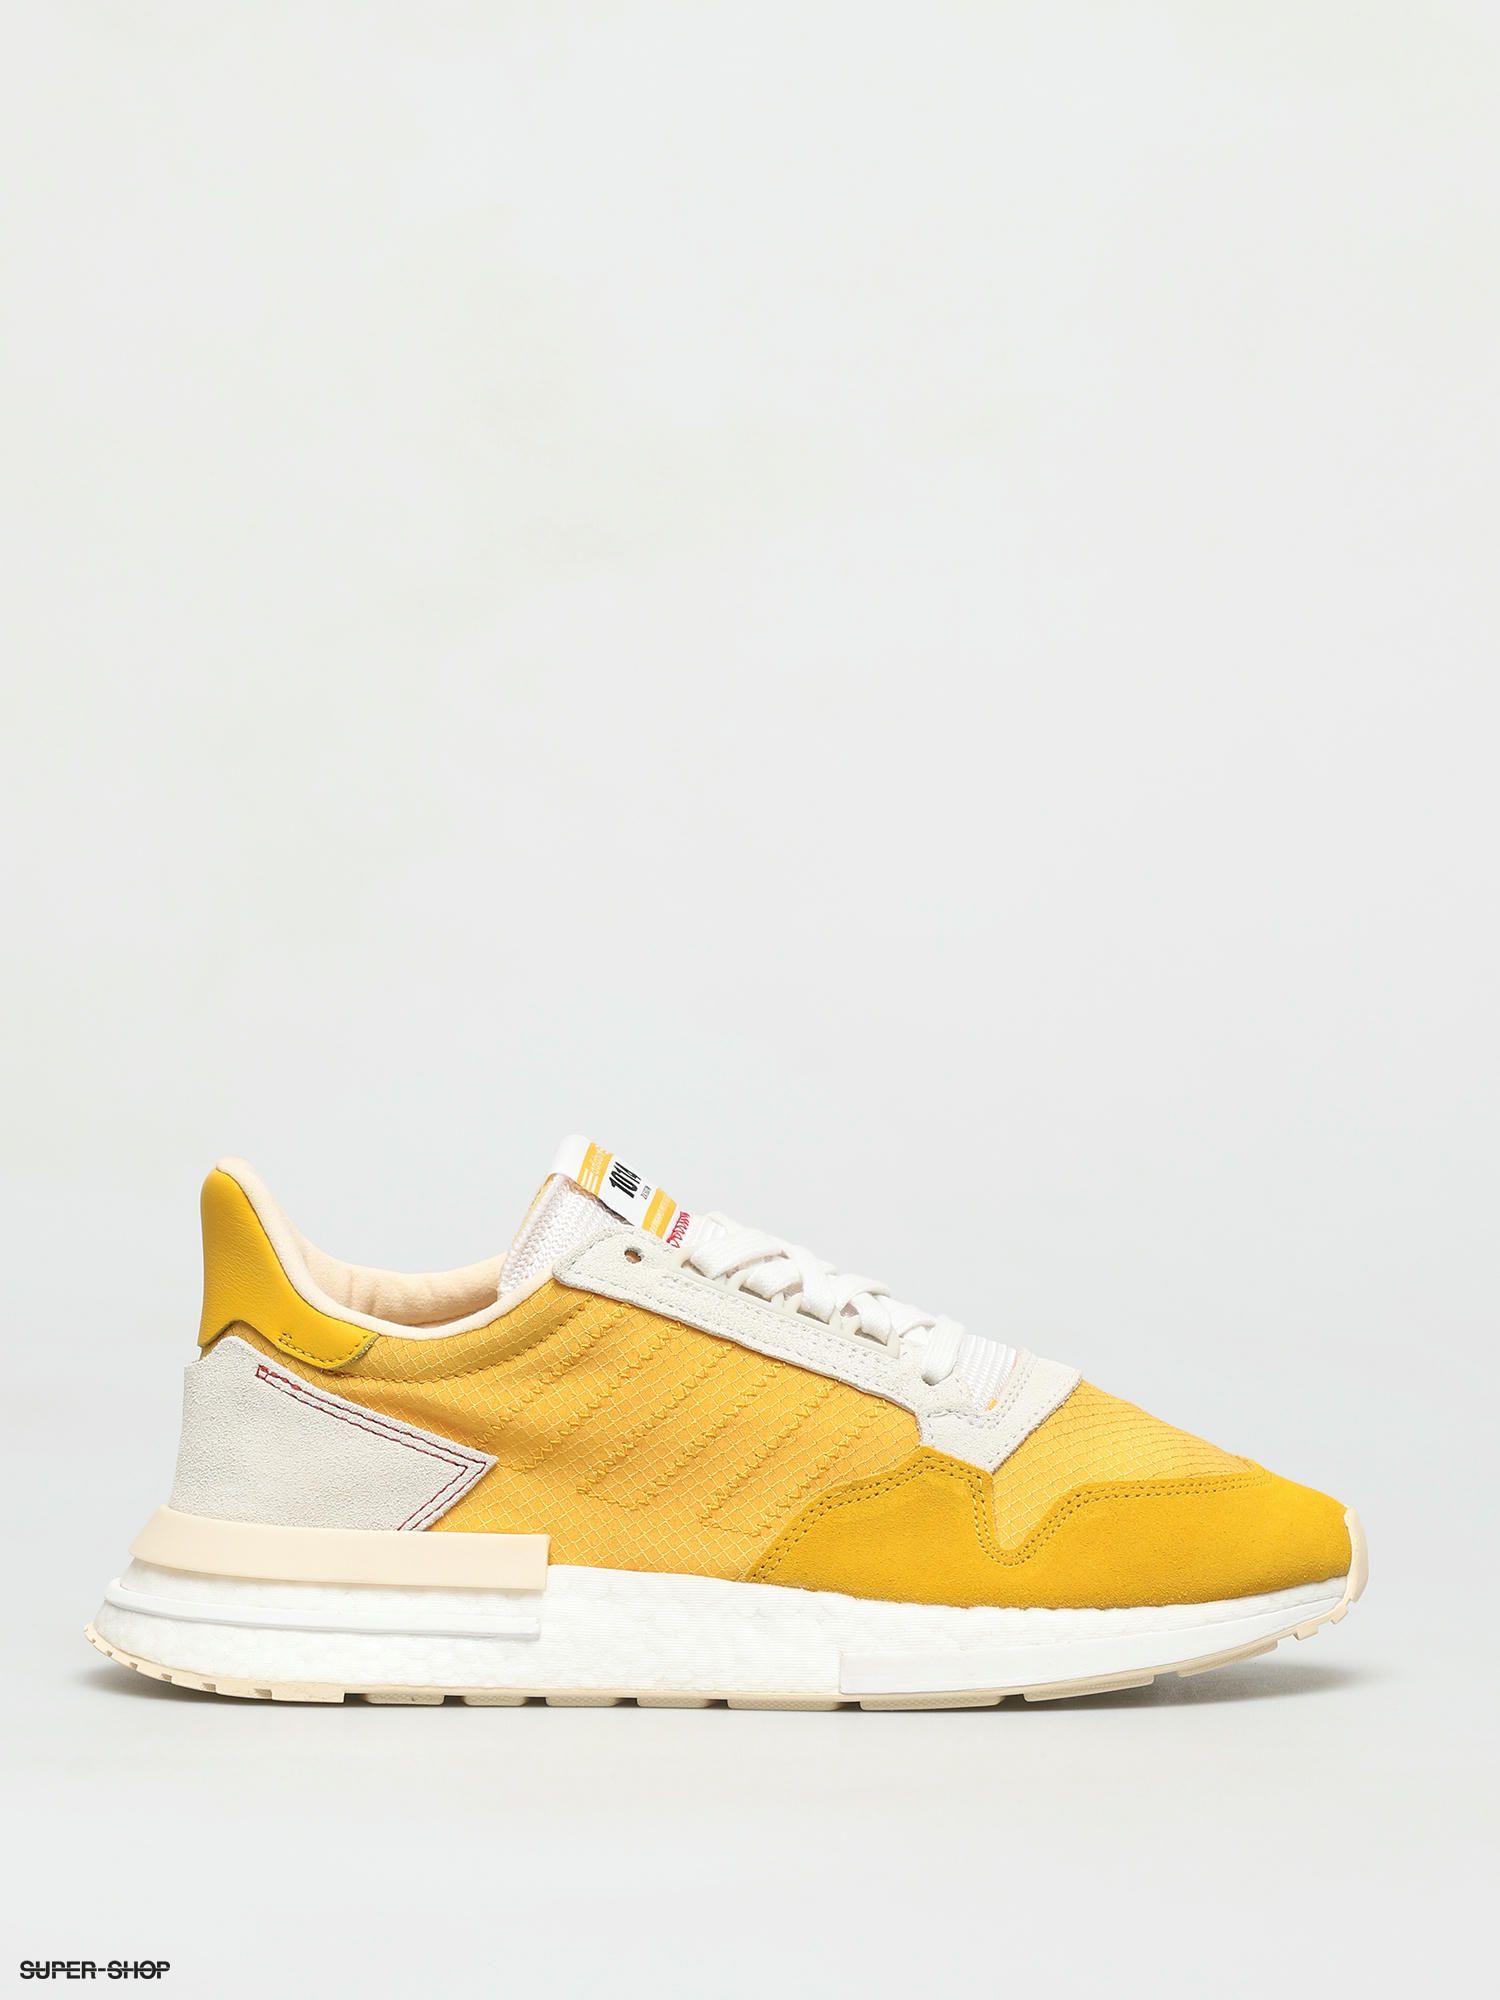 zx 500 rm yellow